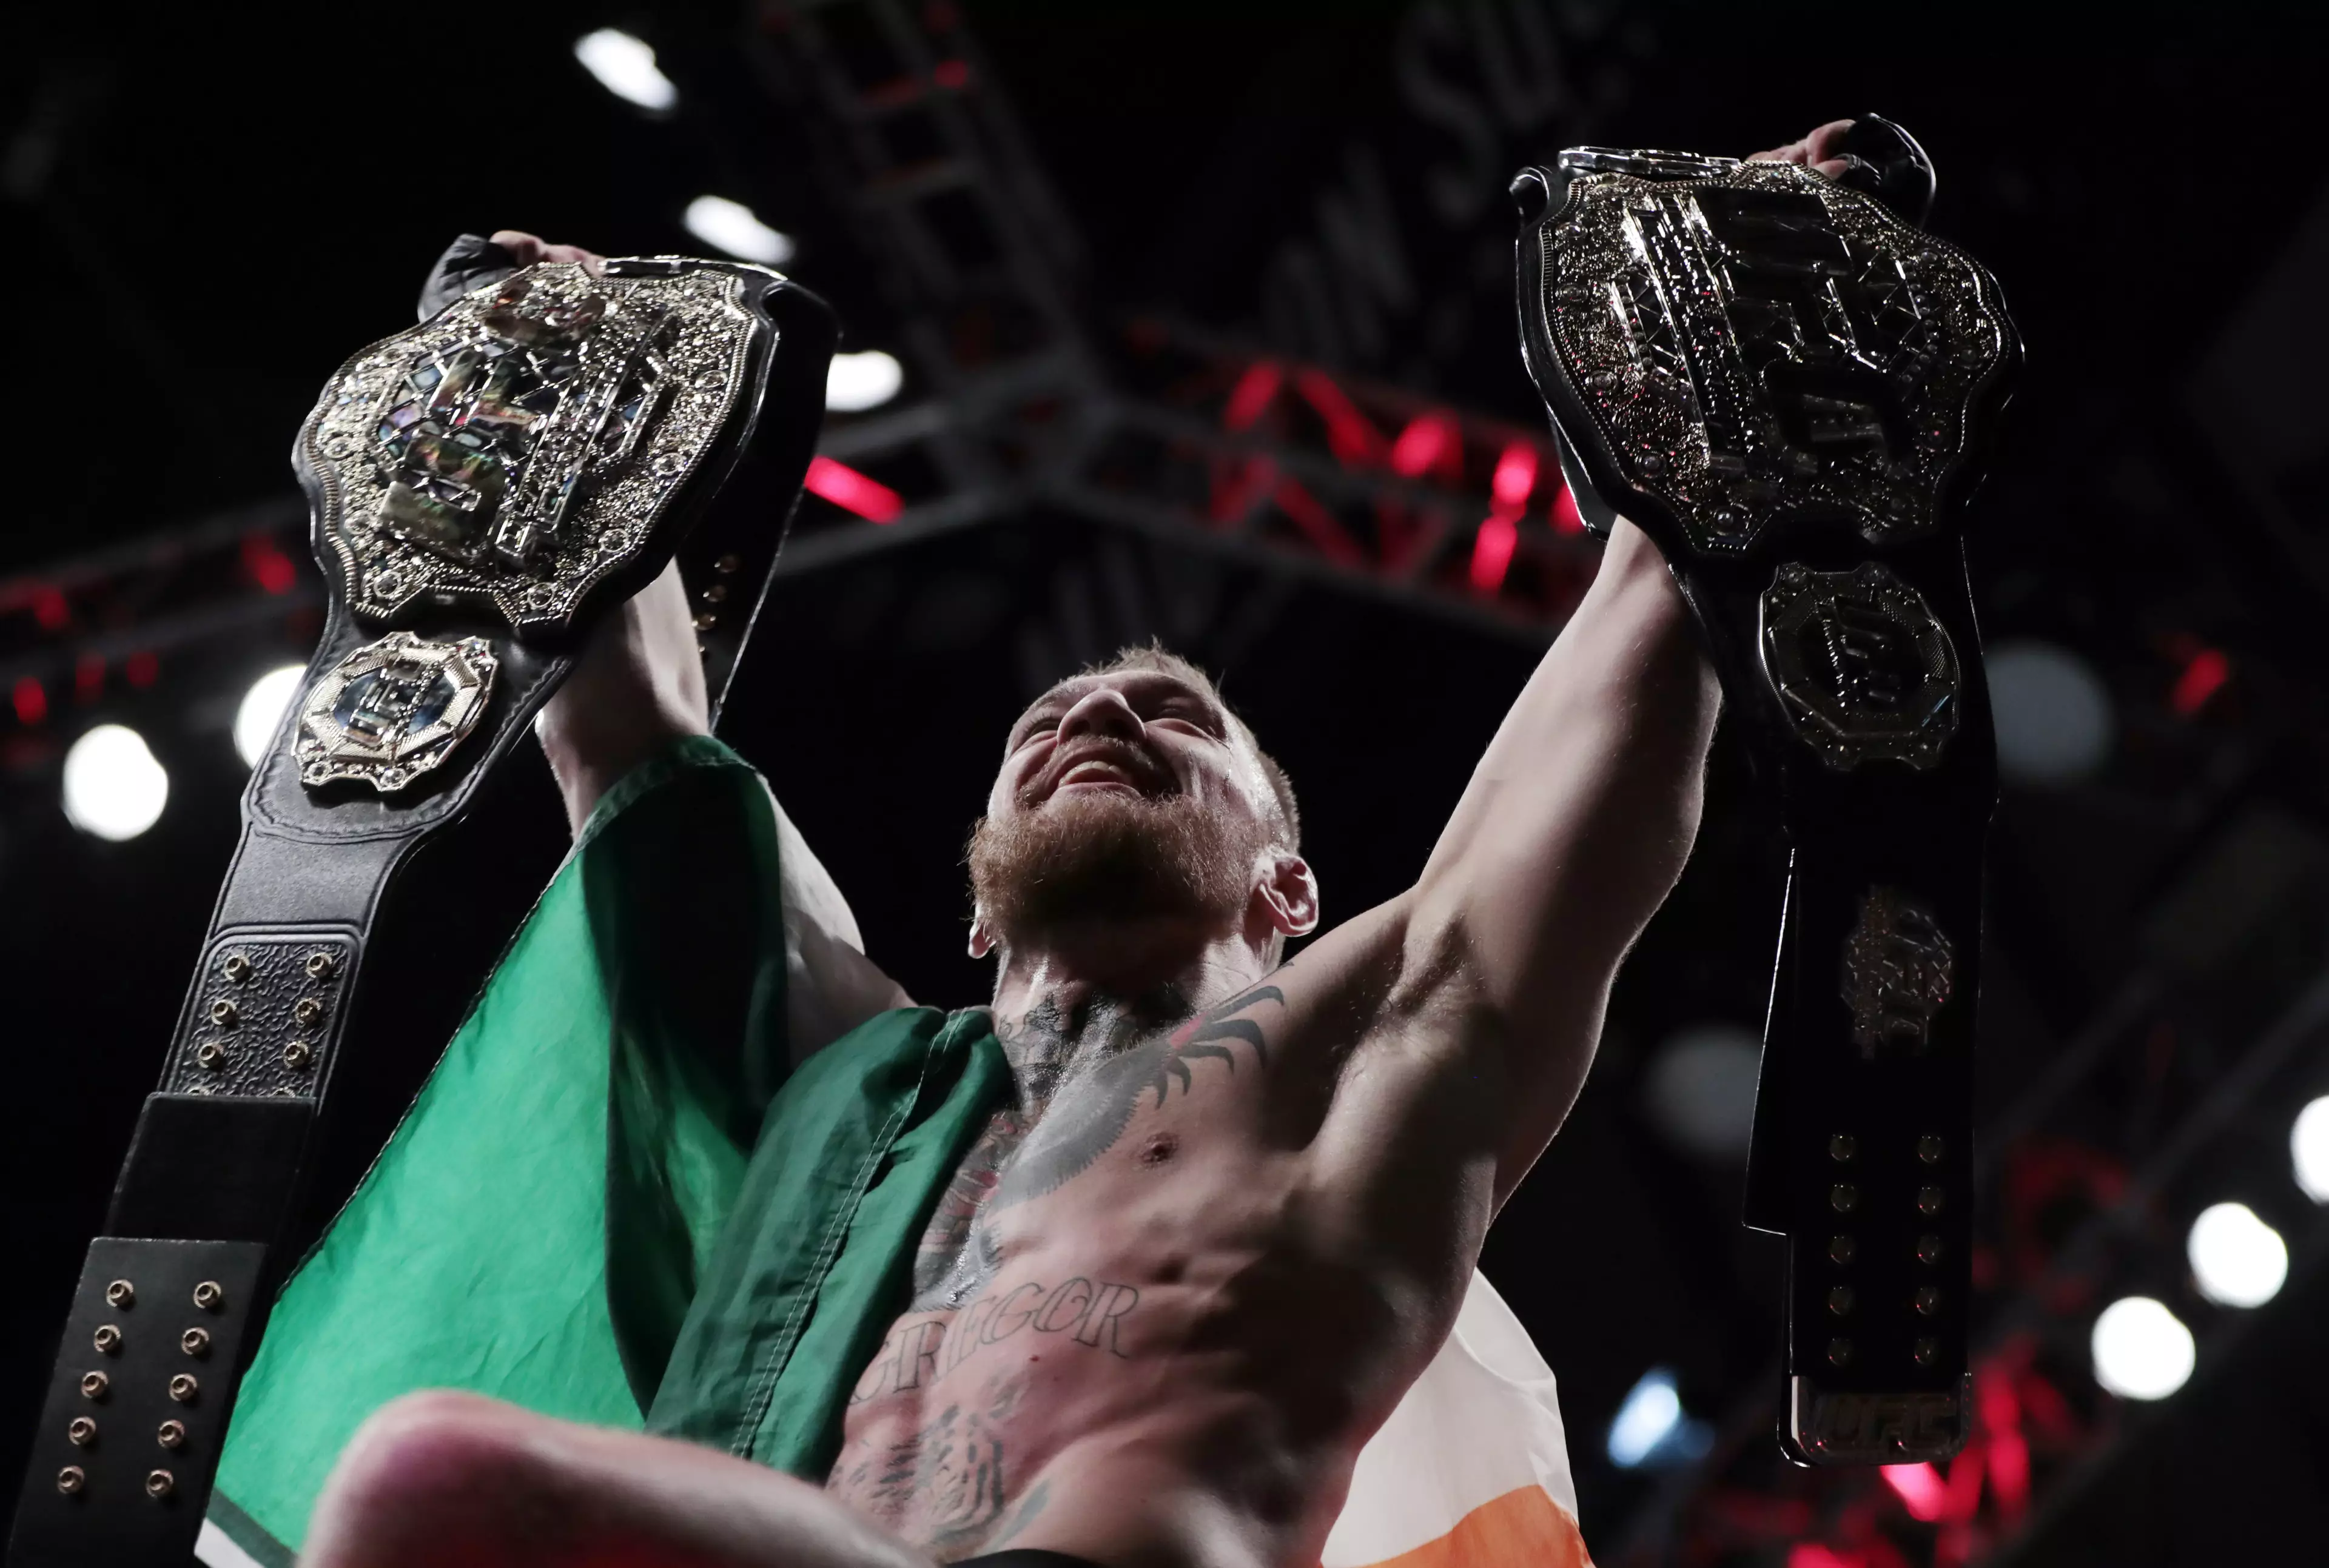 Twitter Reacts To Conor McGregor’s Post-Match Interview 